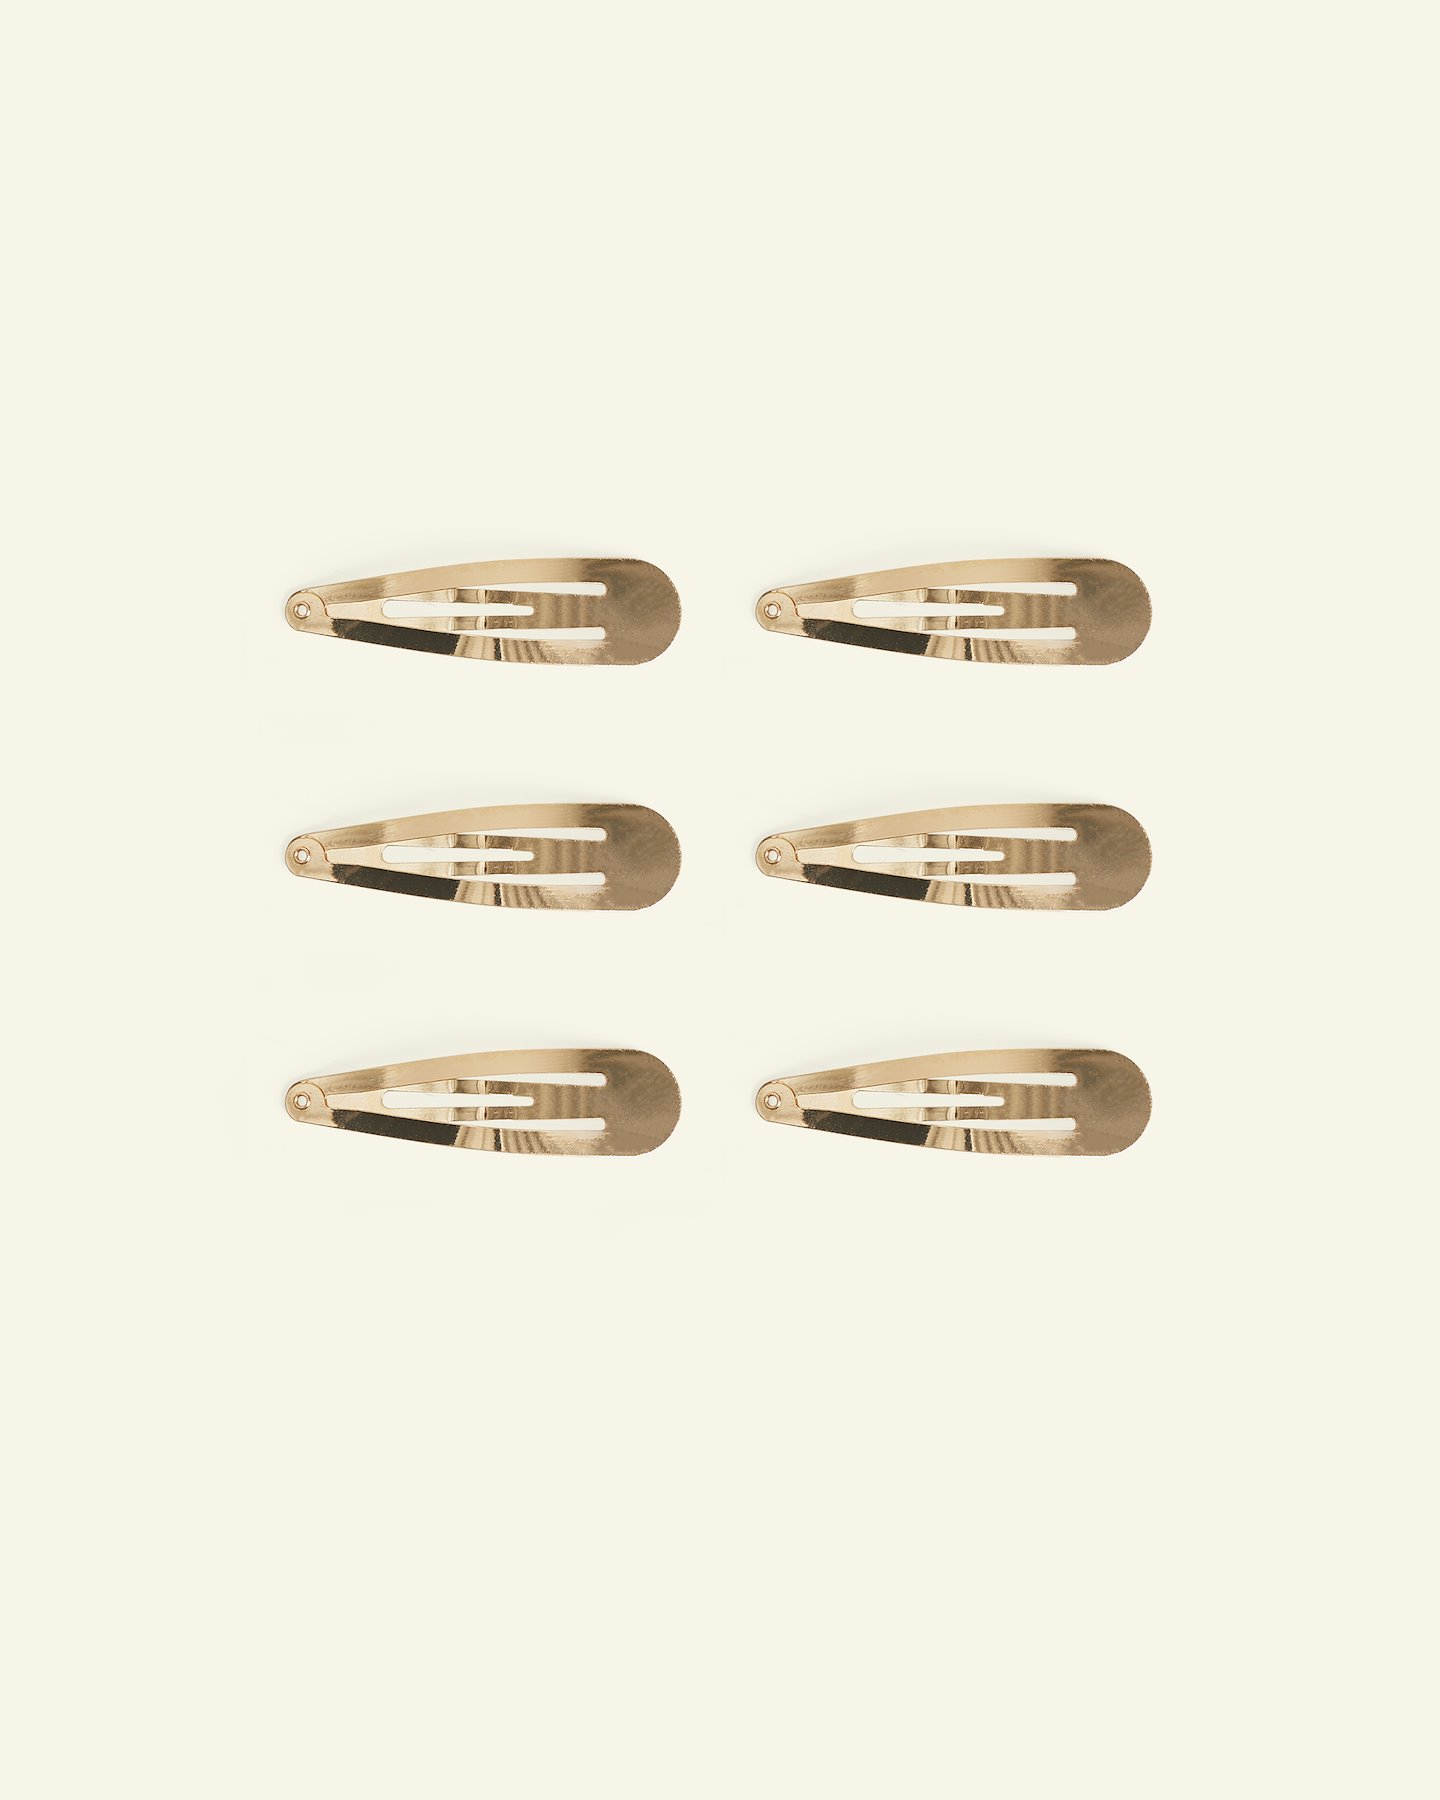 Hair clip metal 60mm gold colored 6pcs 45397_pack